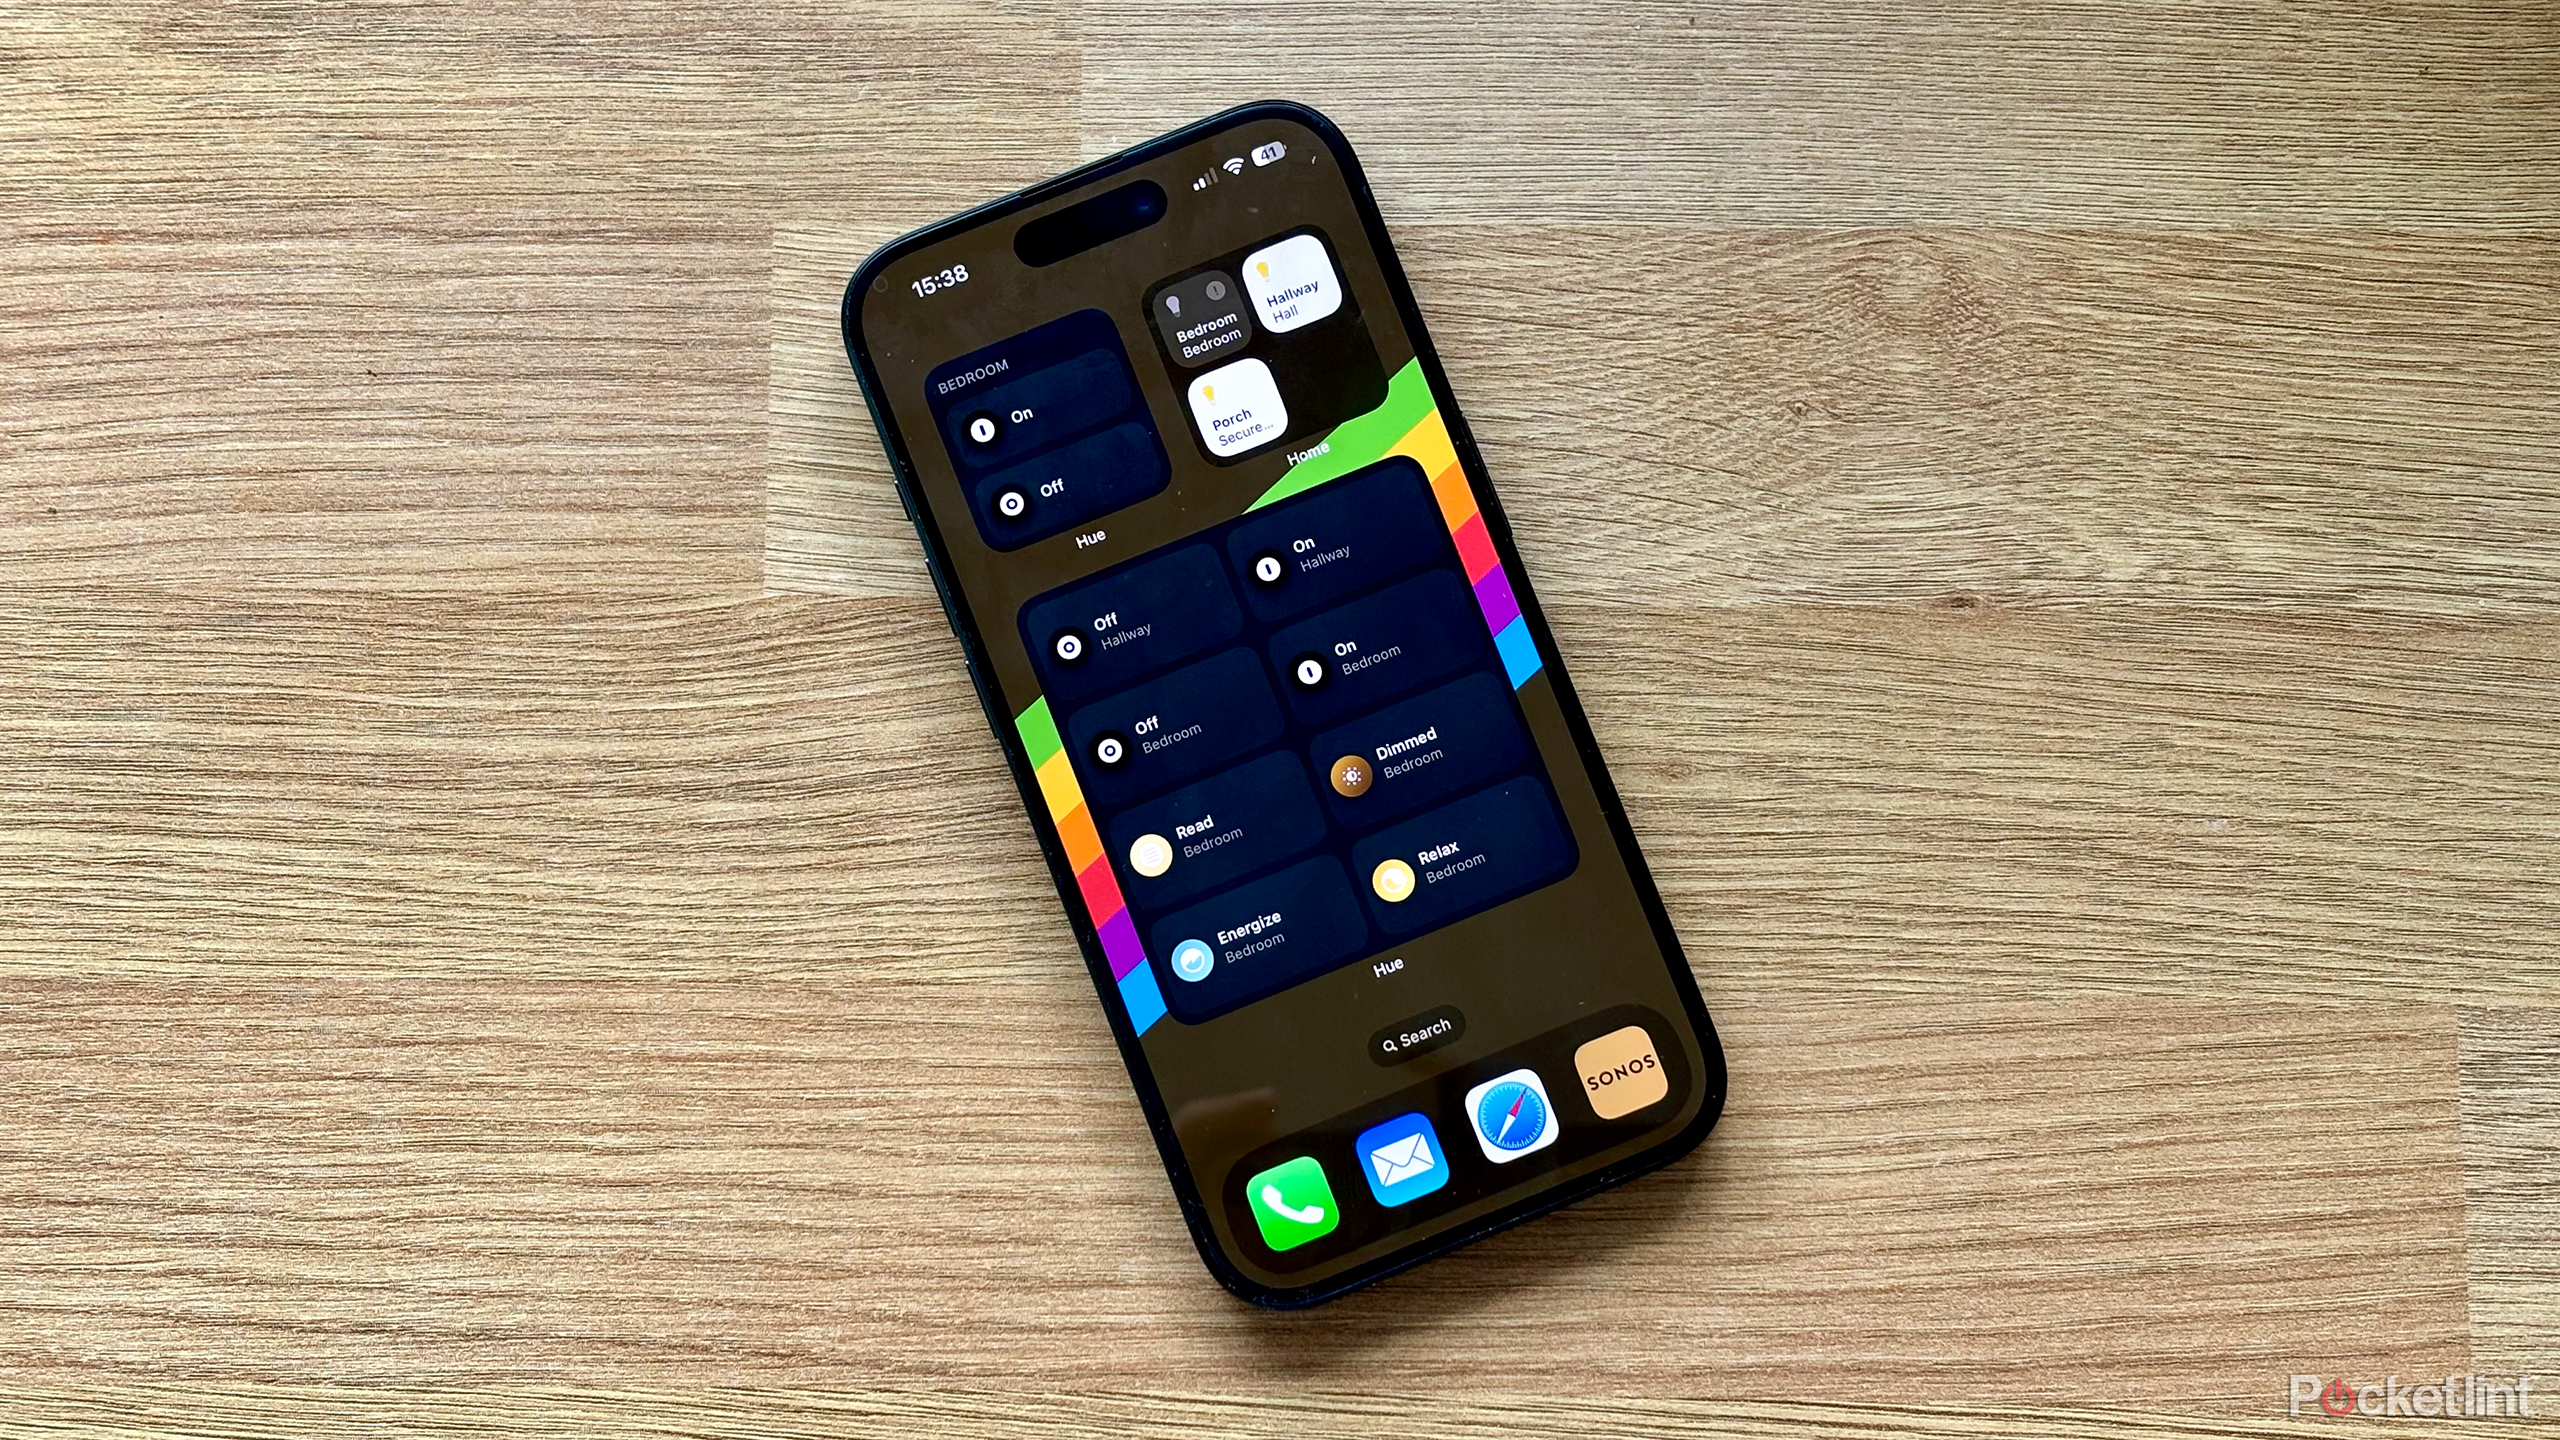 Philips Hue widgets arrive in iOS. Here’s how to use them